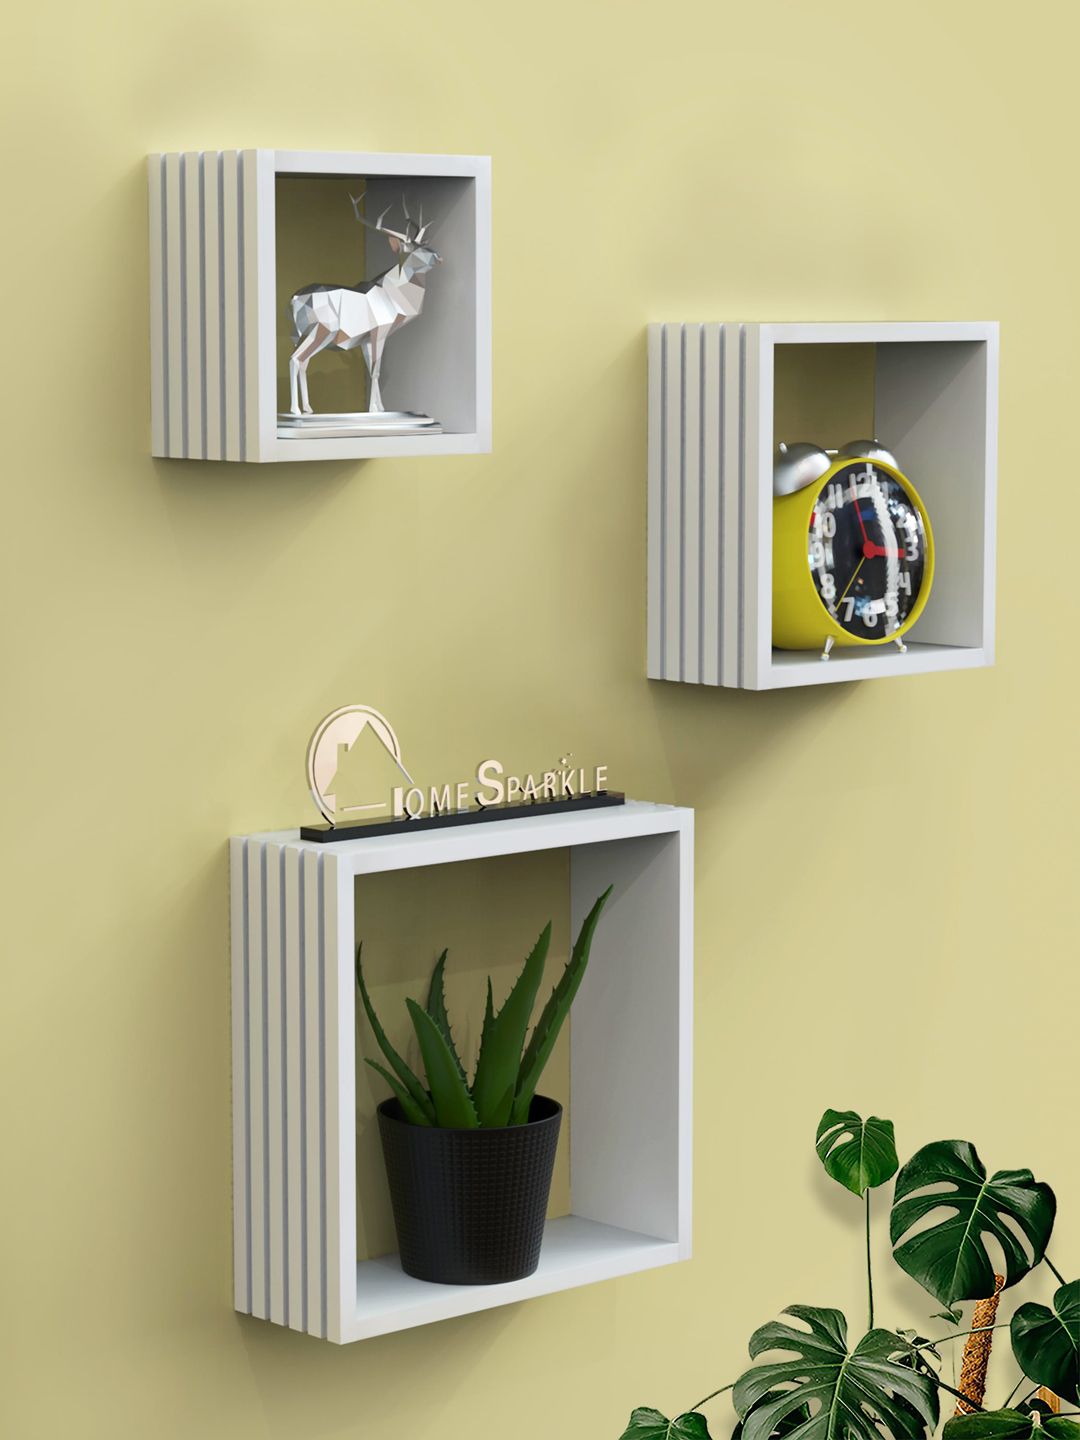 Home Sparkle Set Of 3 White Louvers Design Wall Mounted Cube Wall Shelf Price in India